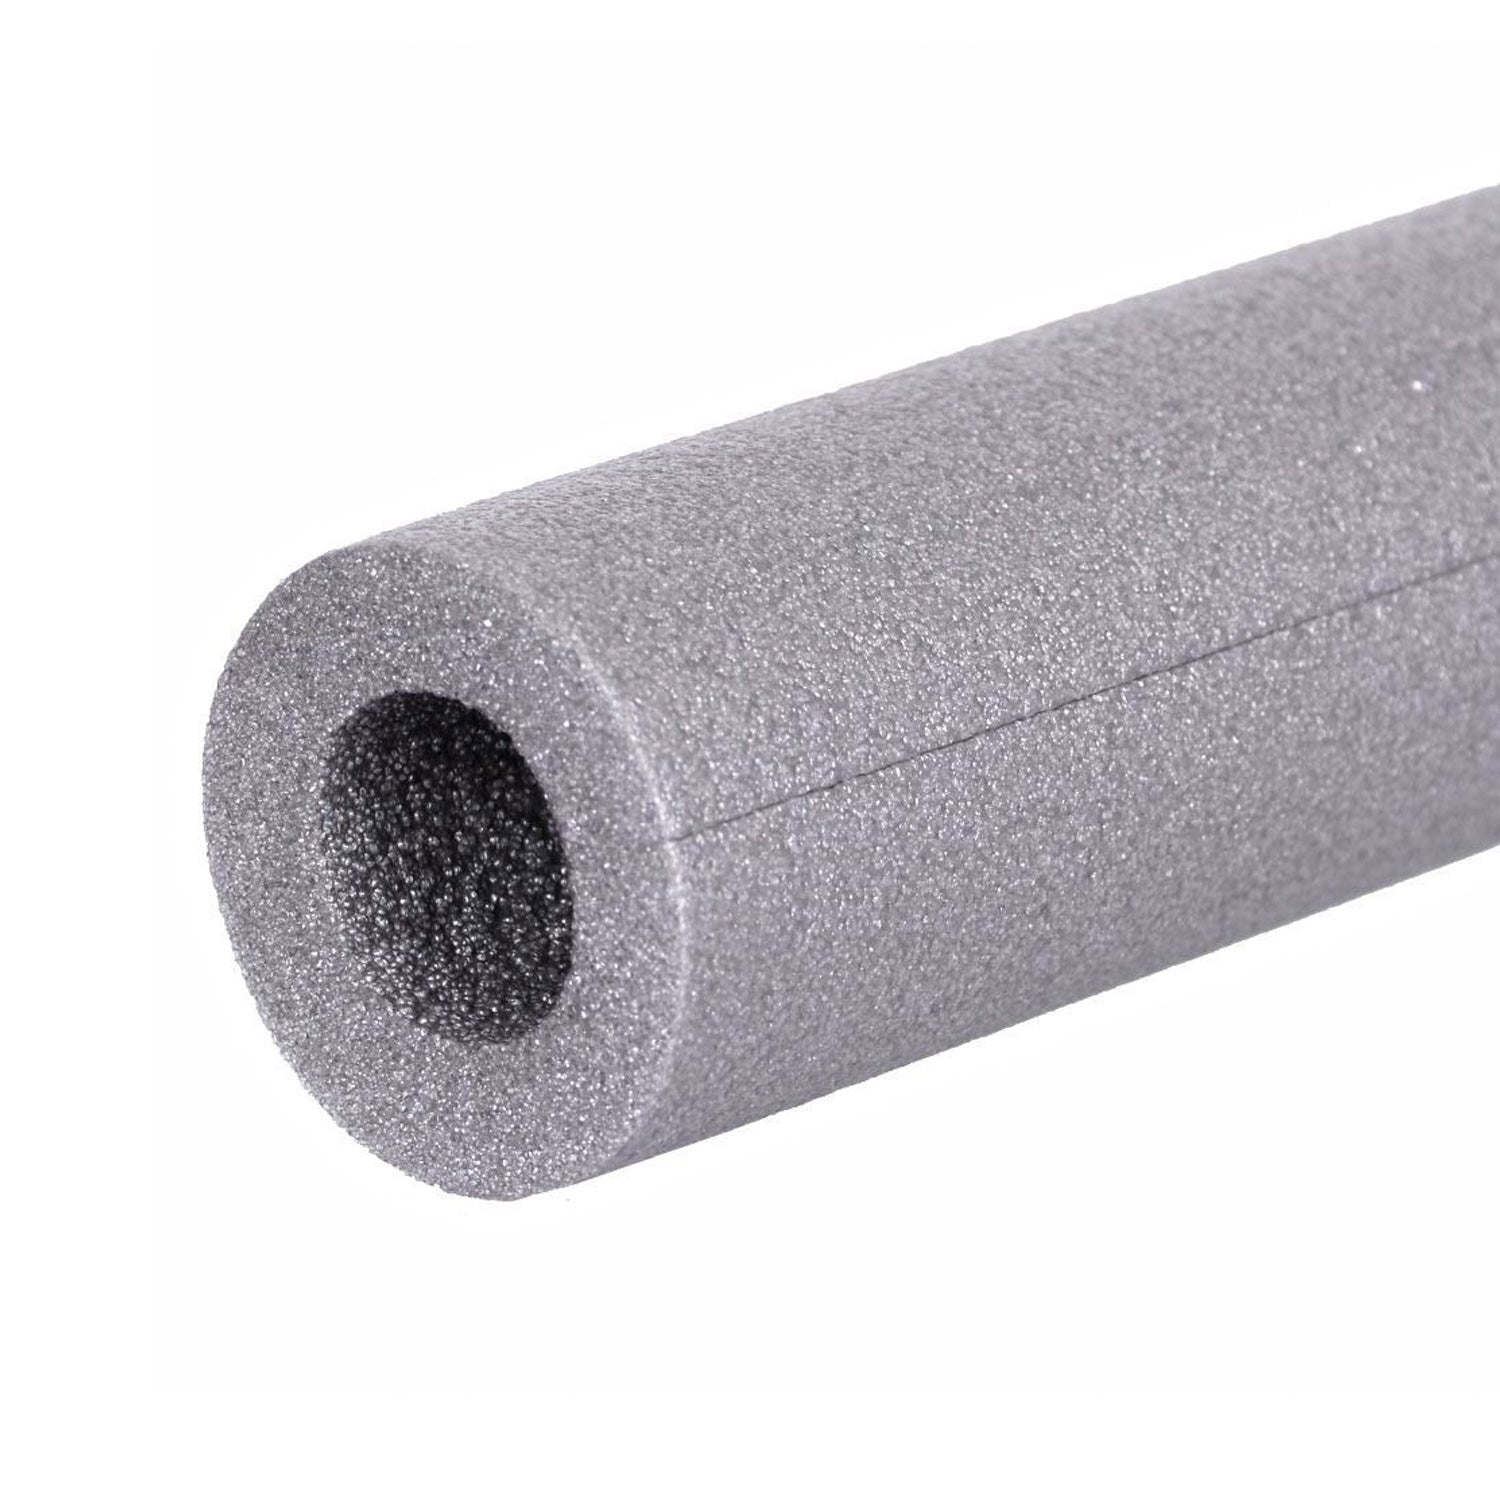 Pipe Isulation 22mm x 1m x 13mm O.D